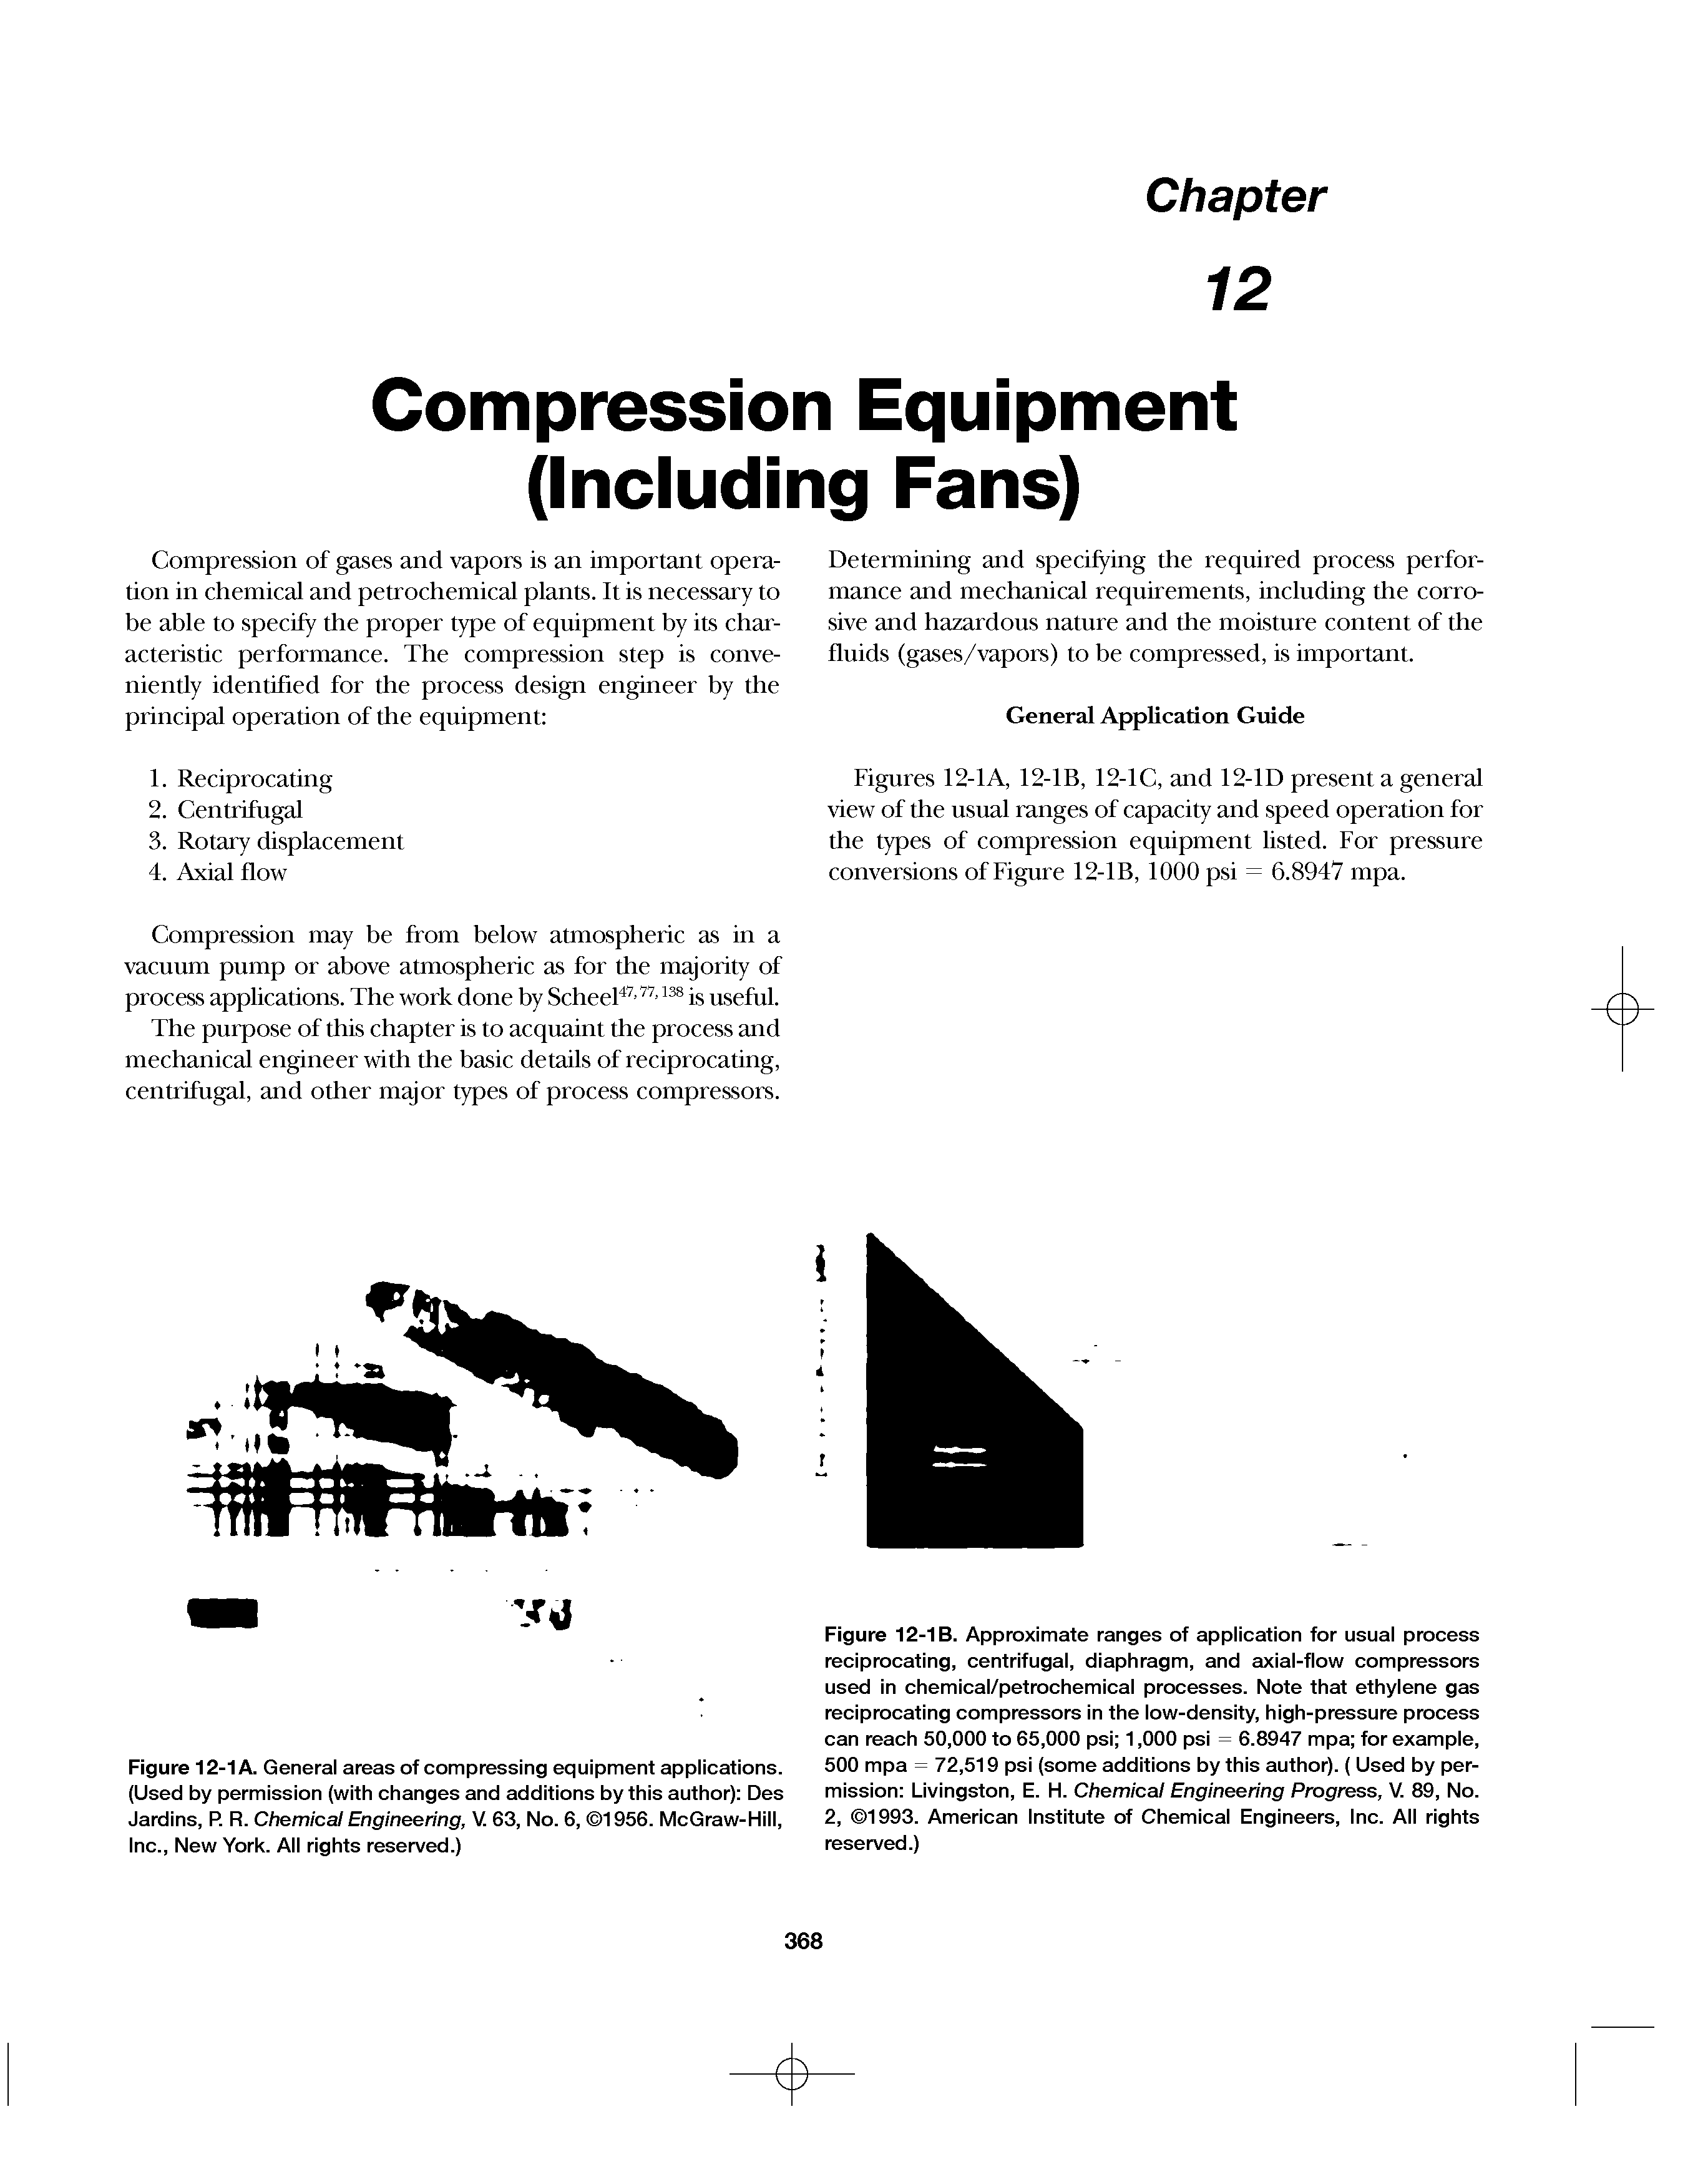 Figure 12-1A. General areas of compressing equipment applications. (Used by permission (with changes and additions by this author) Des Jardins, P. R. Chemical Engineering, V. 63, No. 6, 1956. McGraw-Hill, Inc., New York. All rights reserved.)...